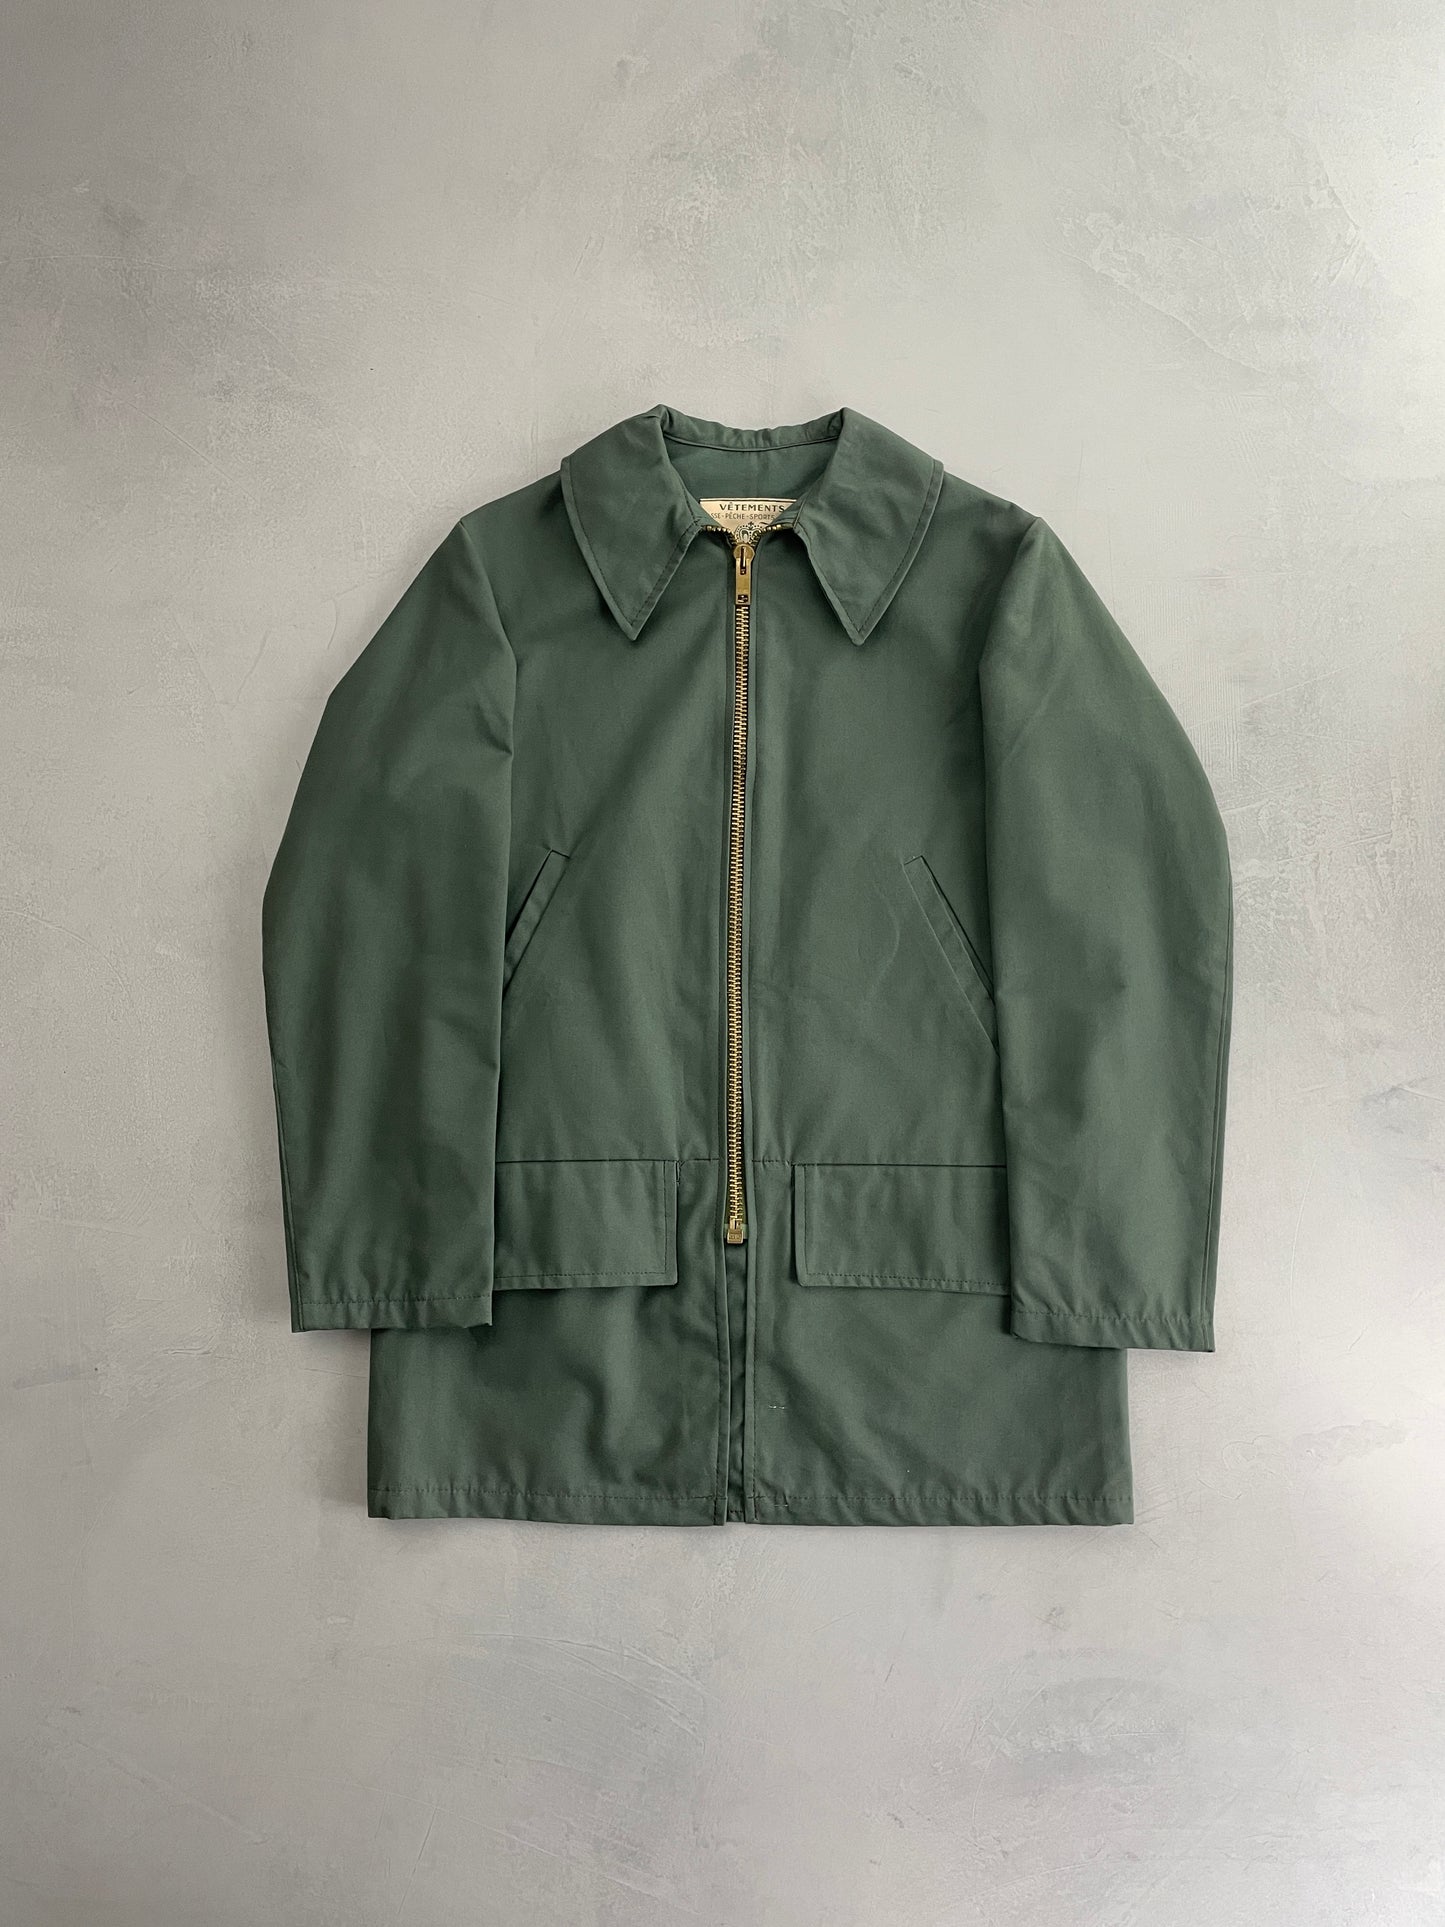 60's French Hunting Jacket [XL]